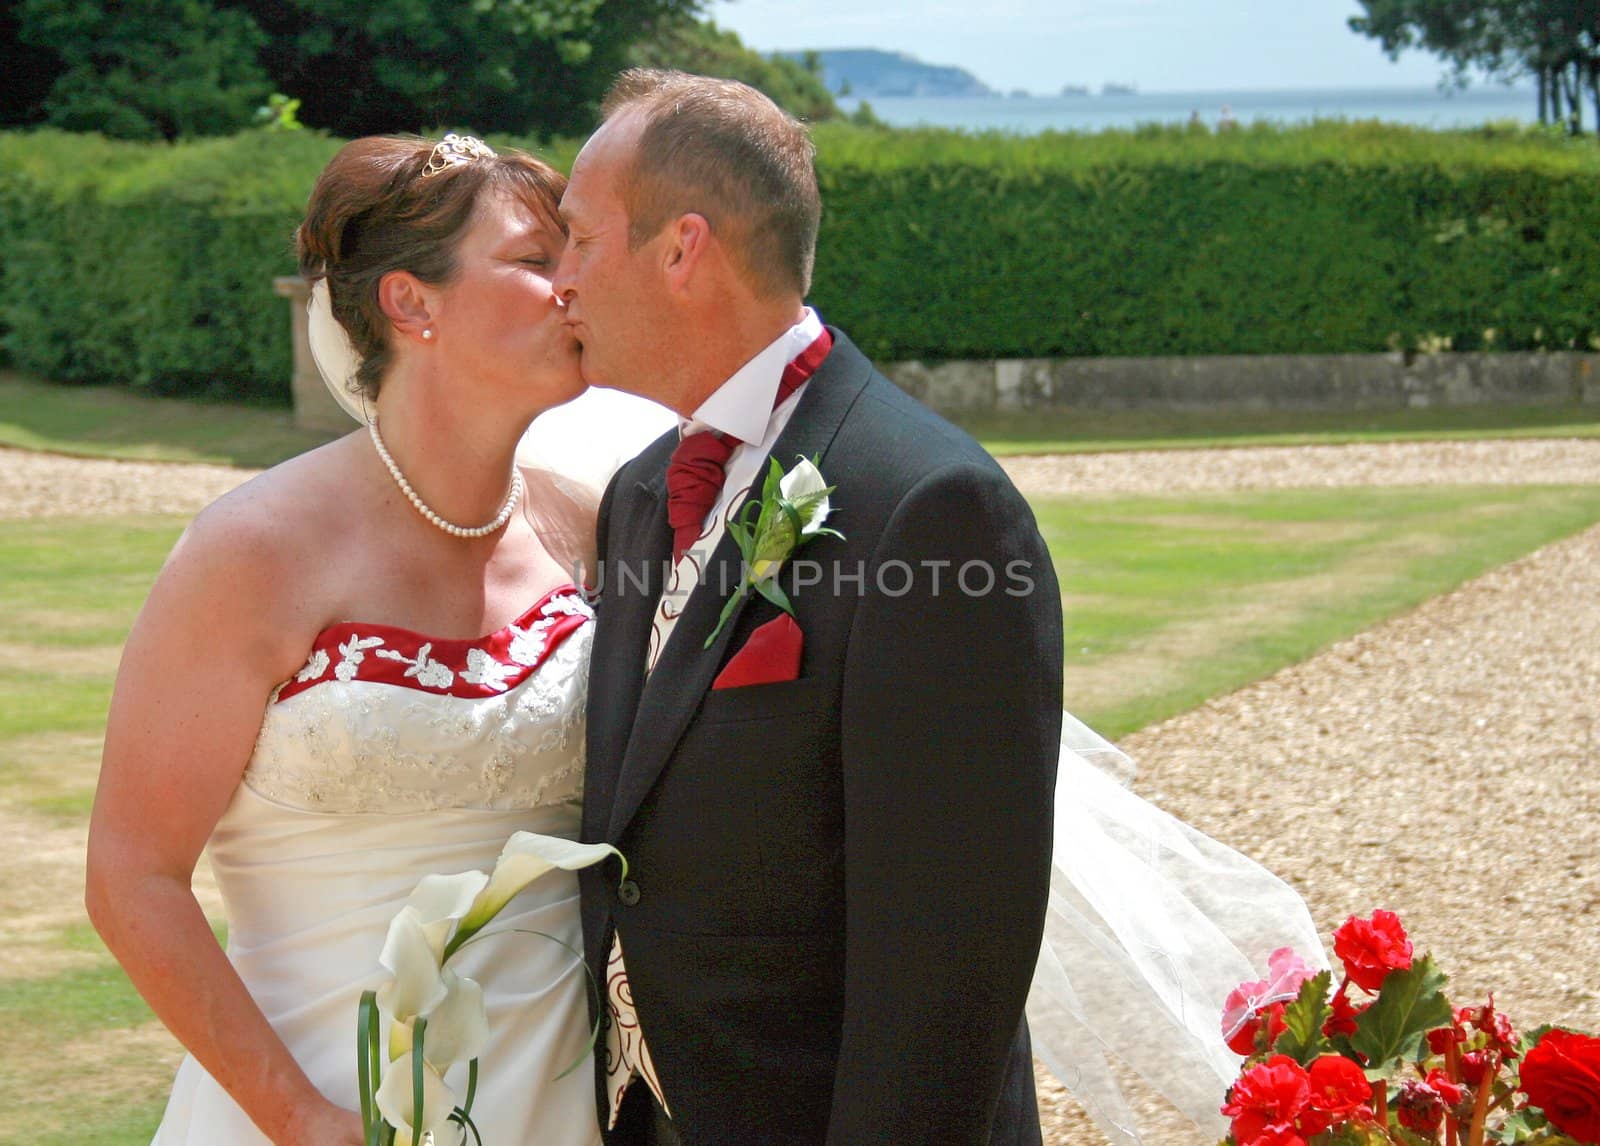 Bride and Groom Kissing with Roses by quackersnaps